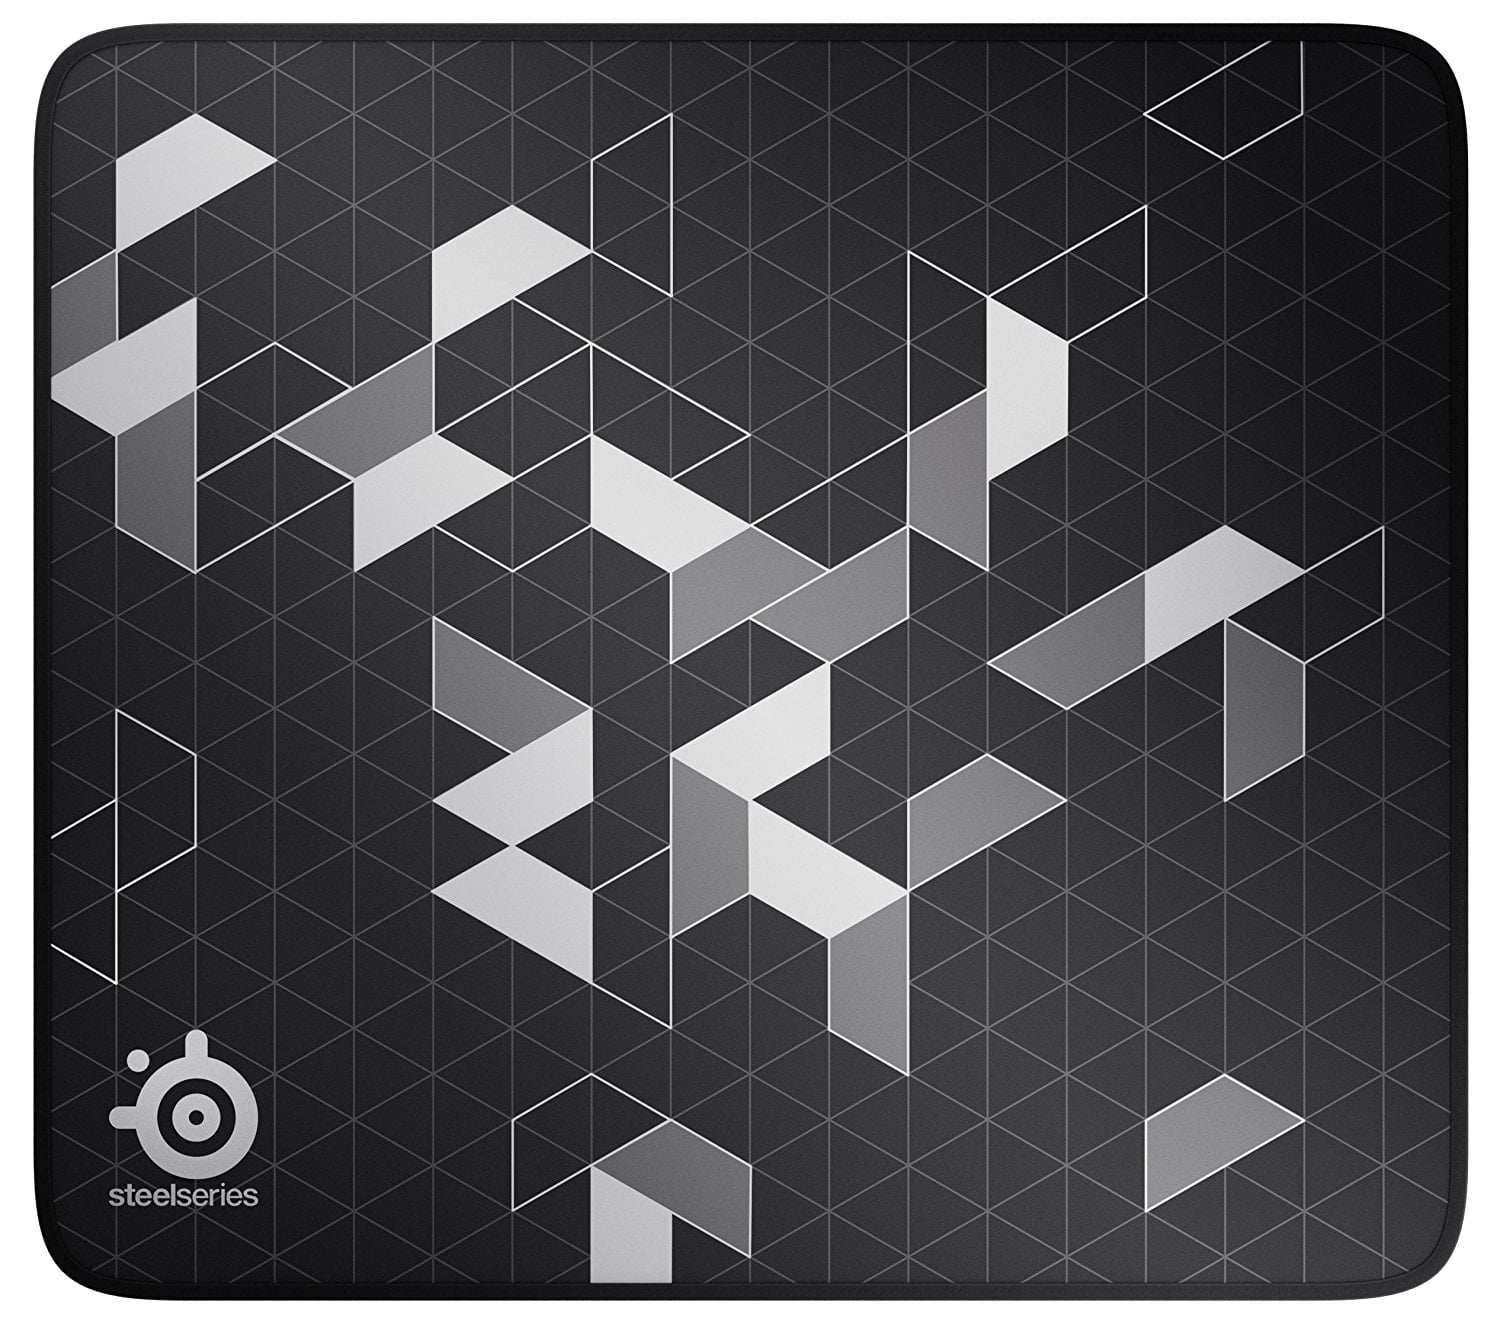 Steelseries Qck Gaming Mouse Pad Micro Woven Textured Surface